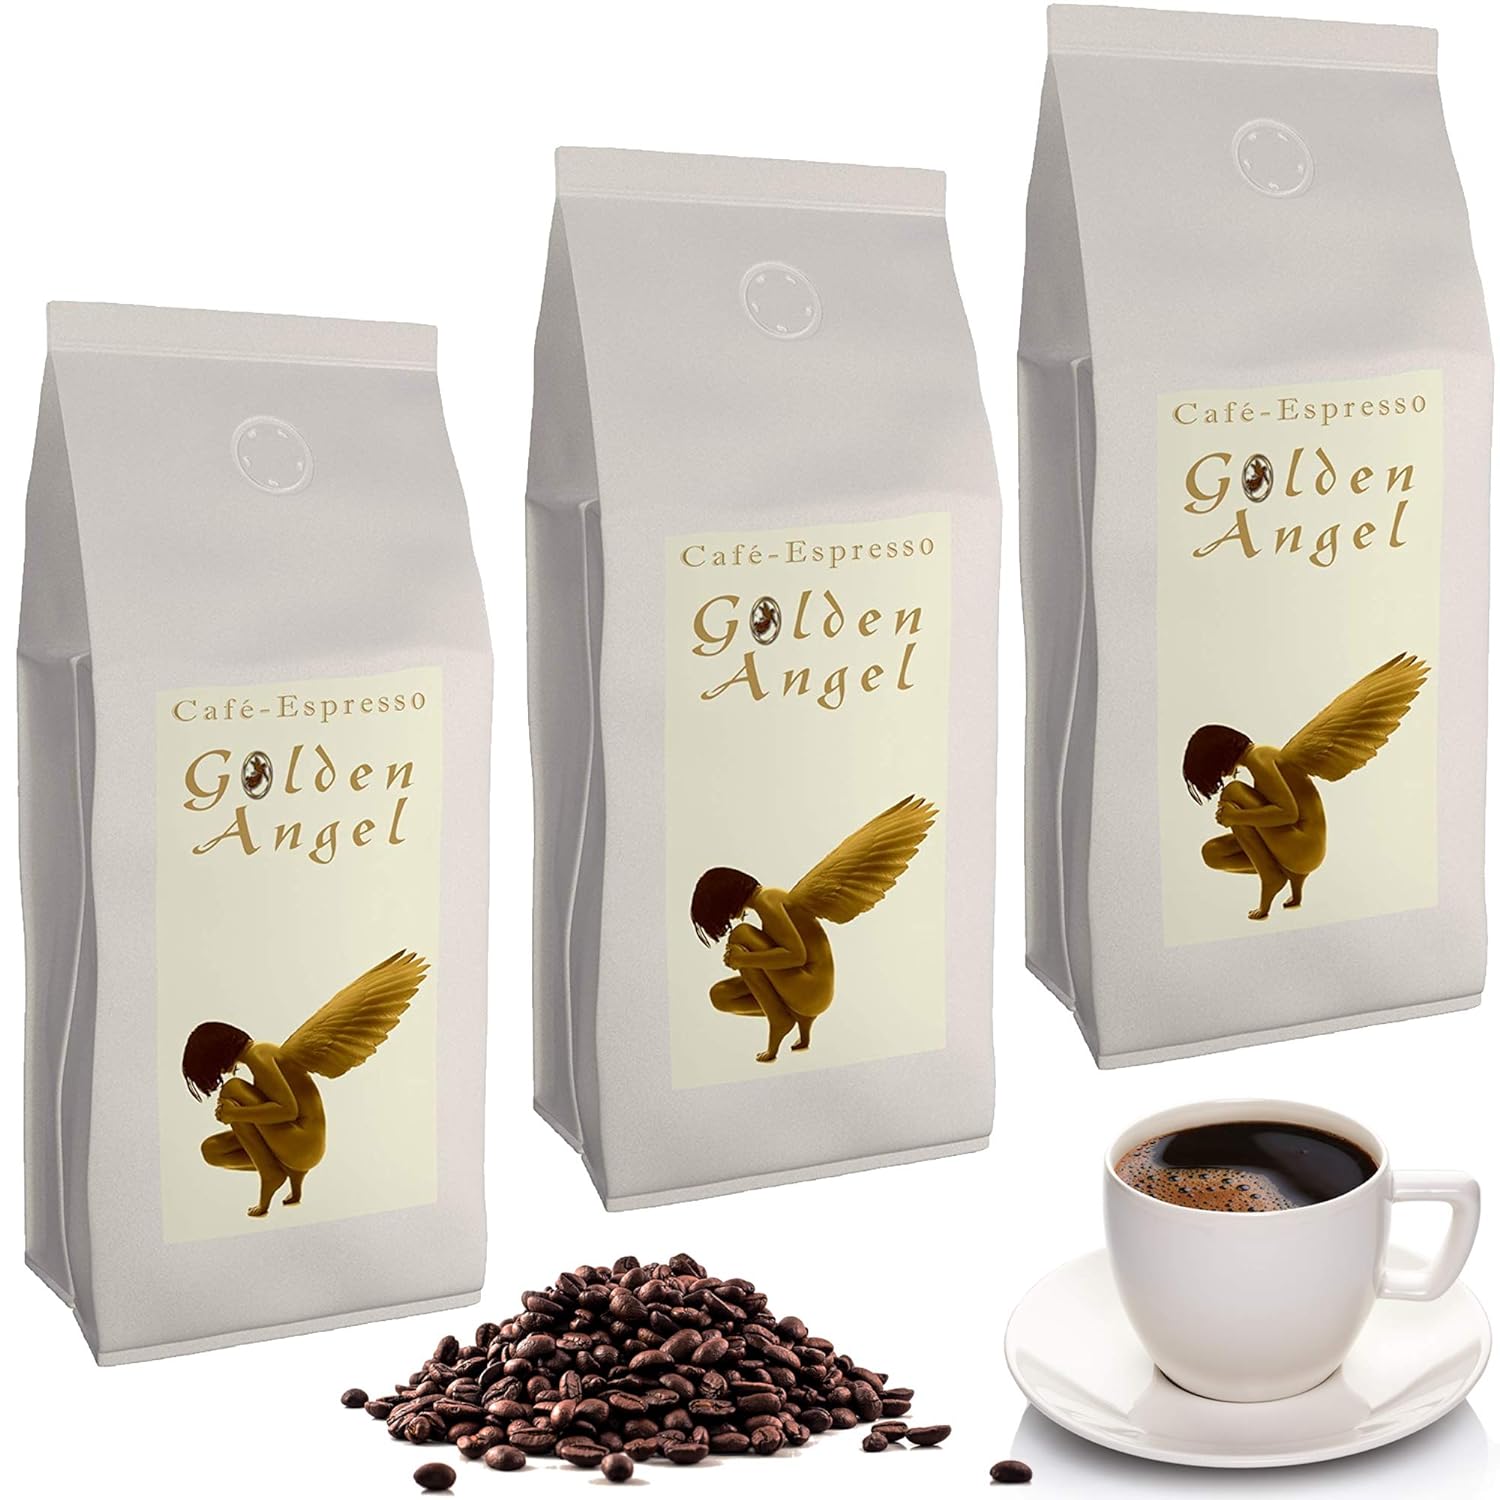 C&T Golden Angel Espresso Deluxe 3 x 1000 g Whole coffee beans - the chocolate - top coffee from our popular espresso angel series